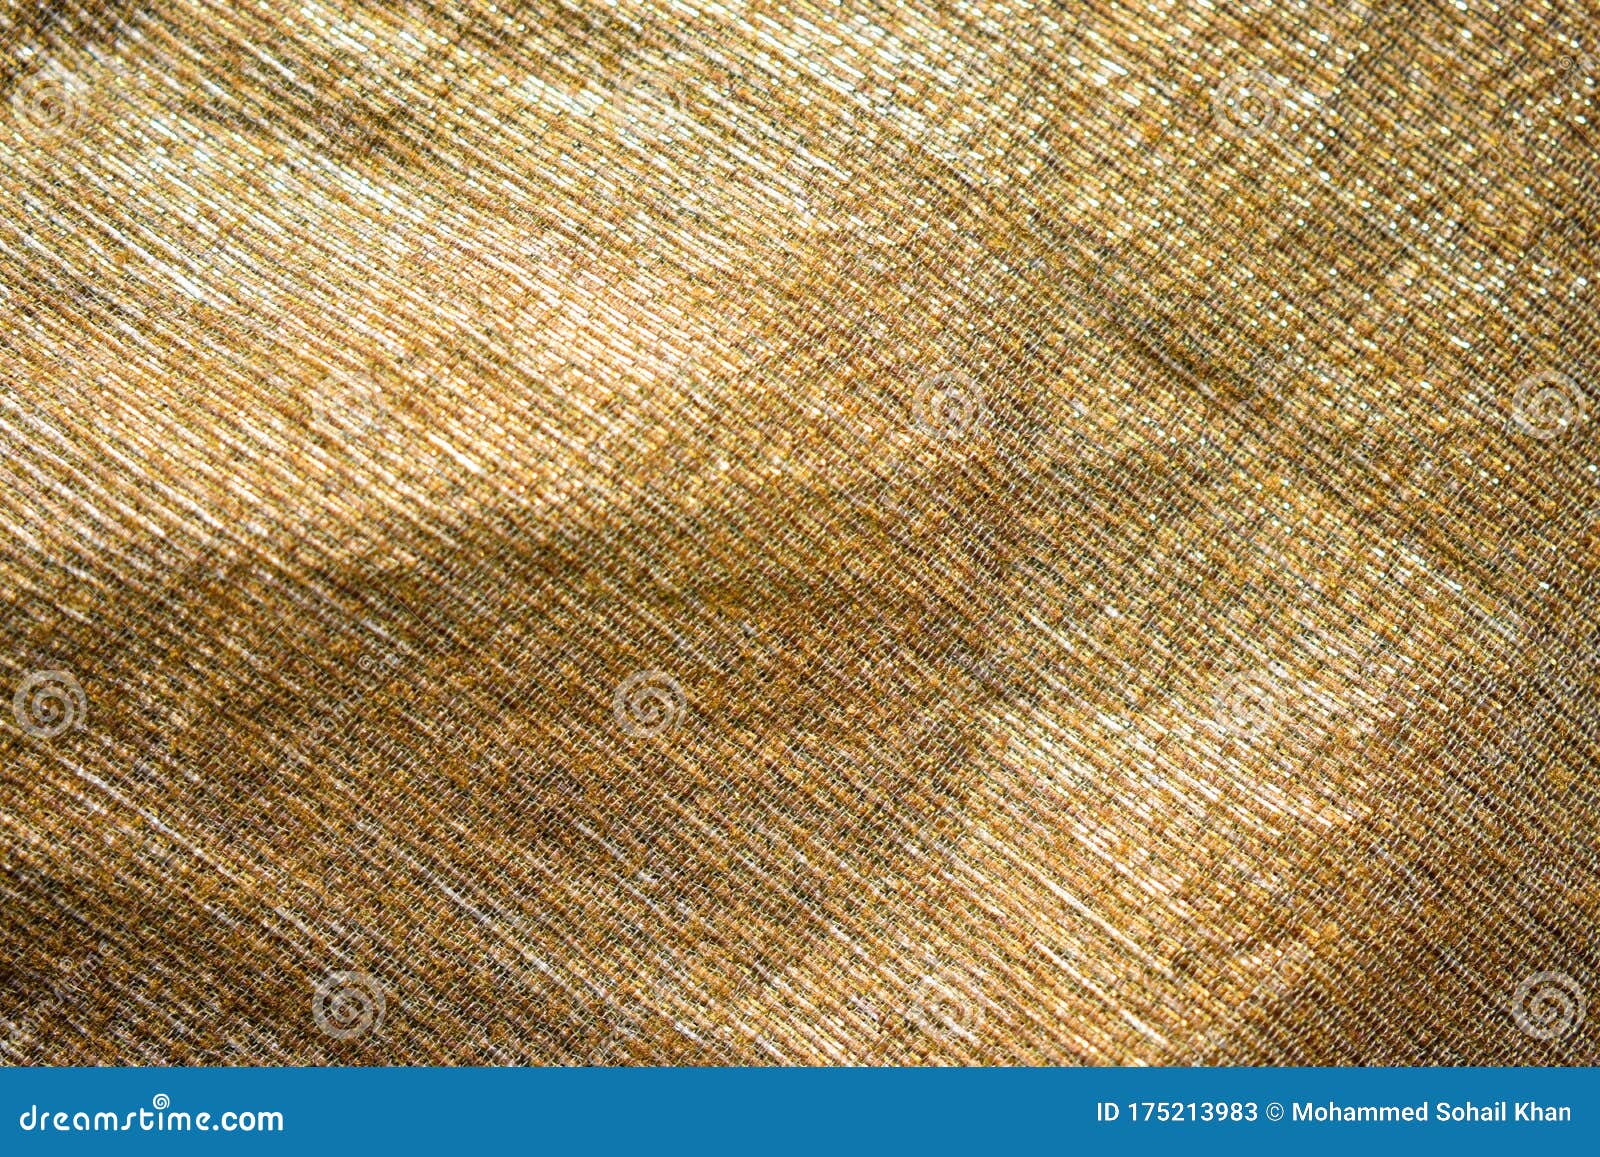 detail dork yellow color texture of fabric/cloth  background stock photograph